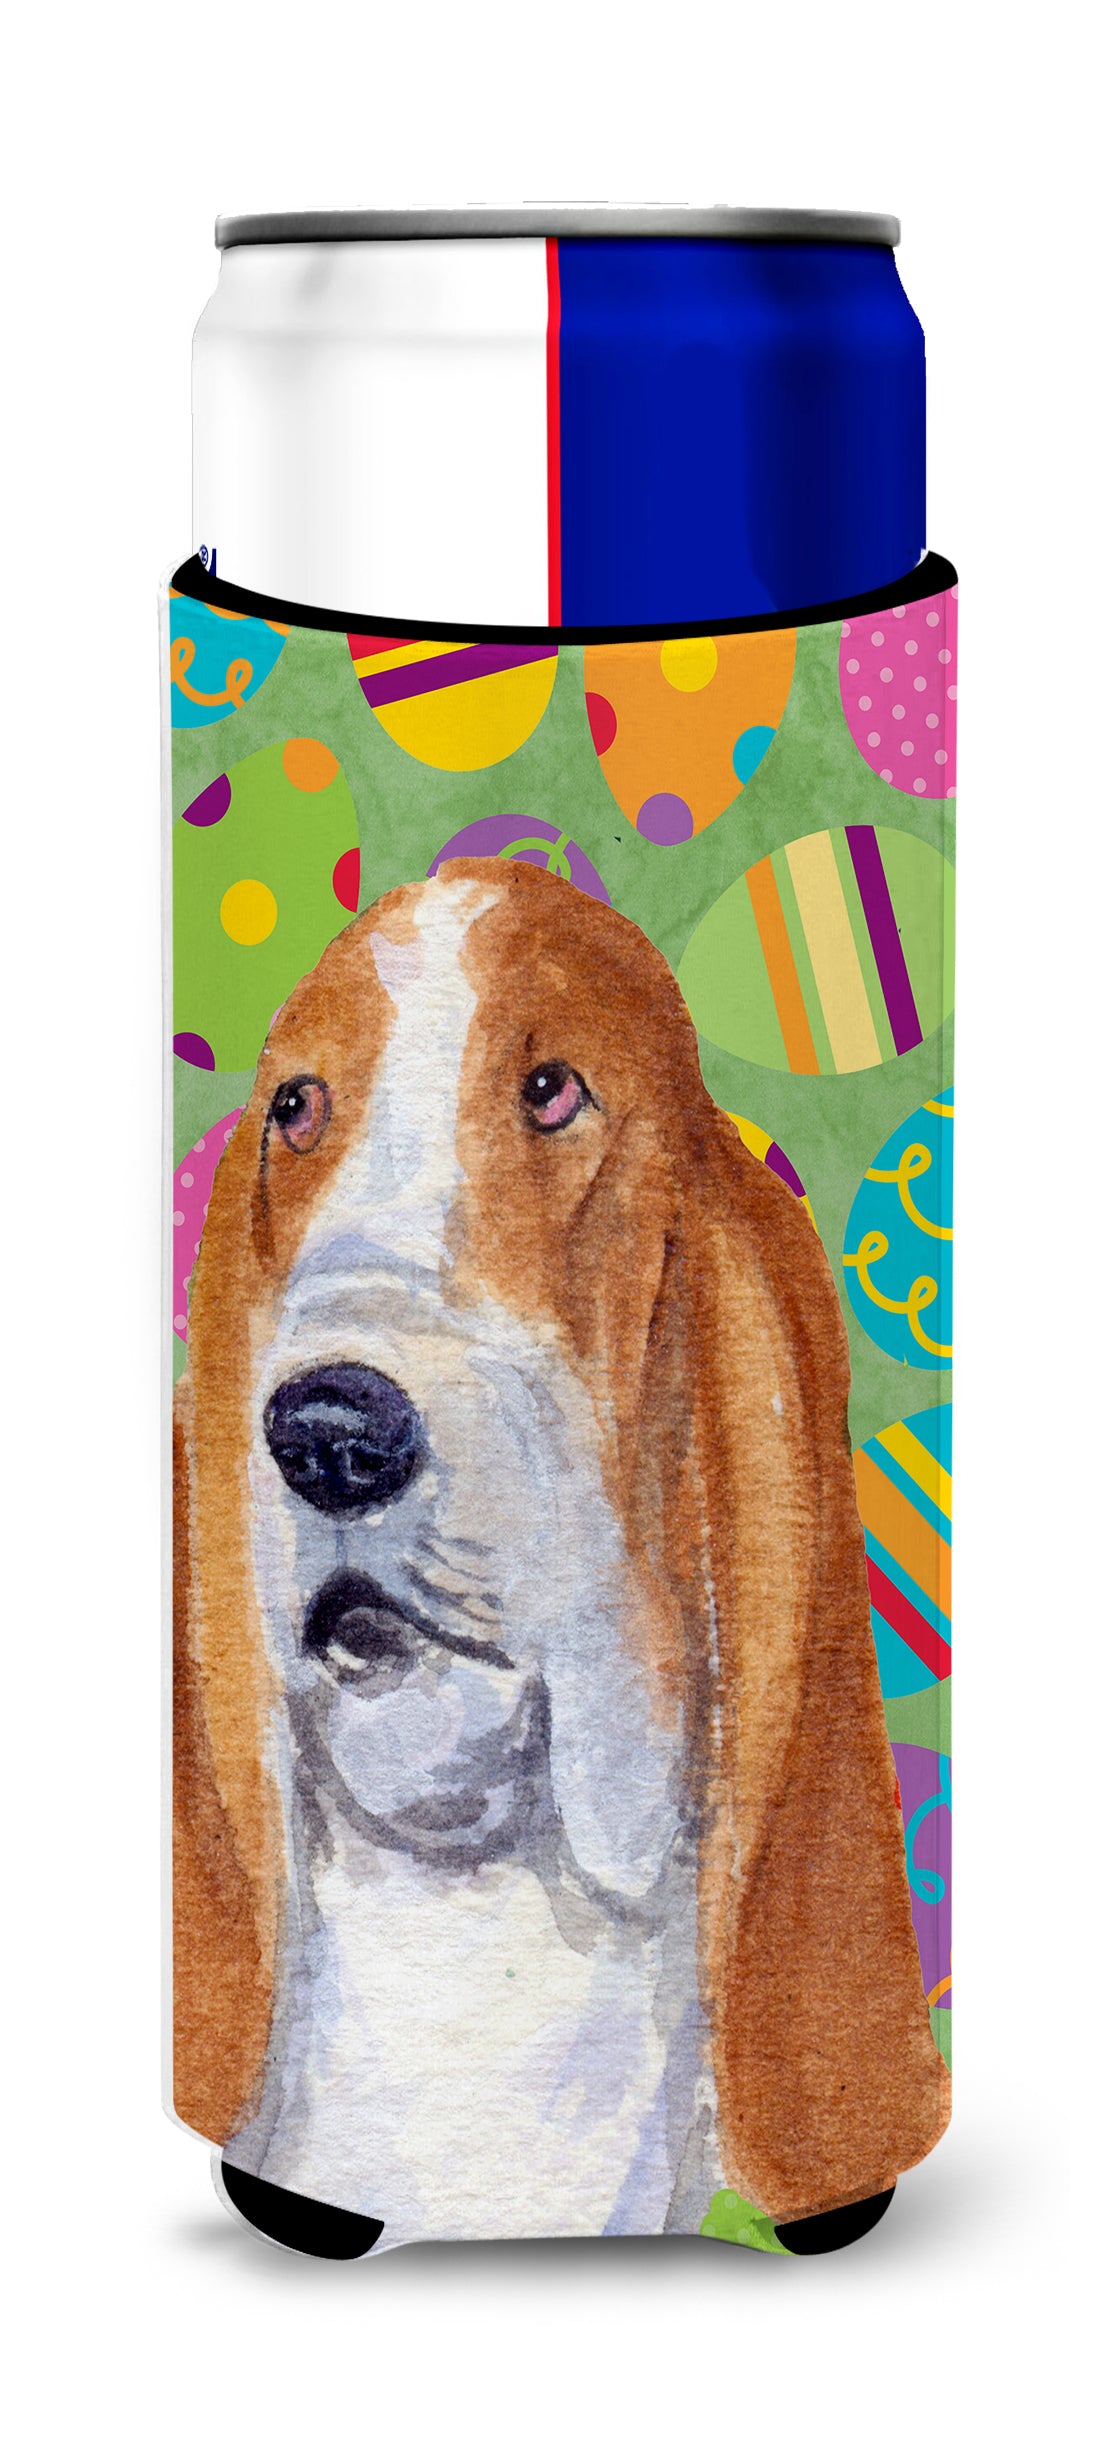 Basset Hound Easter Eggtravaganza Ultra Beverage Insulators for slim cans SS4873MUK.